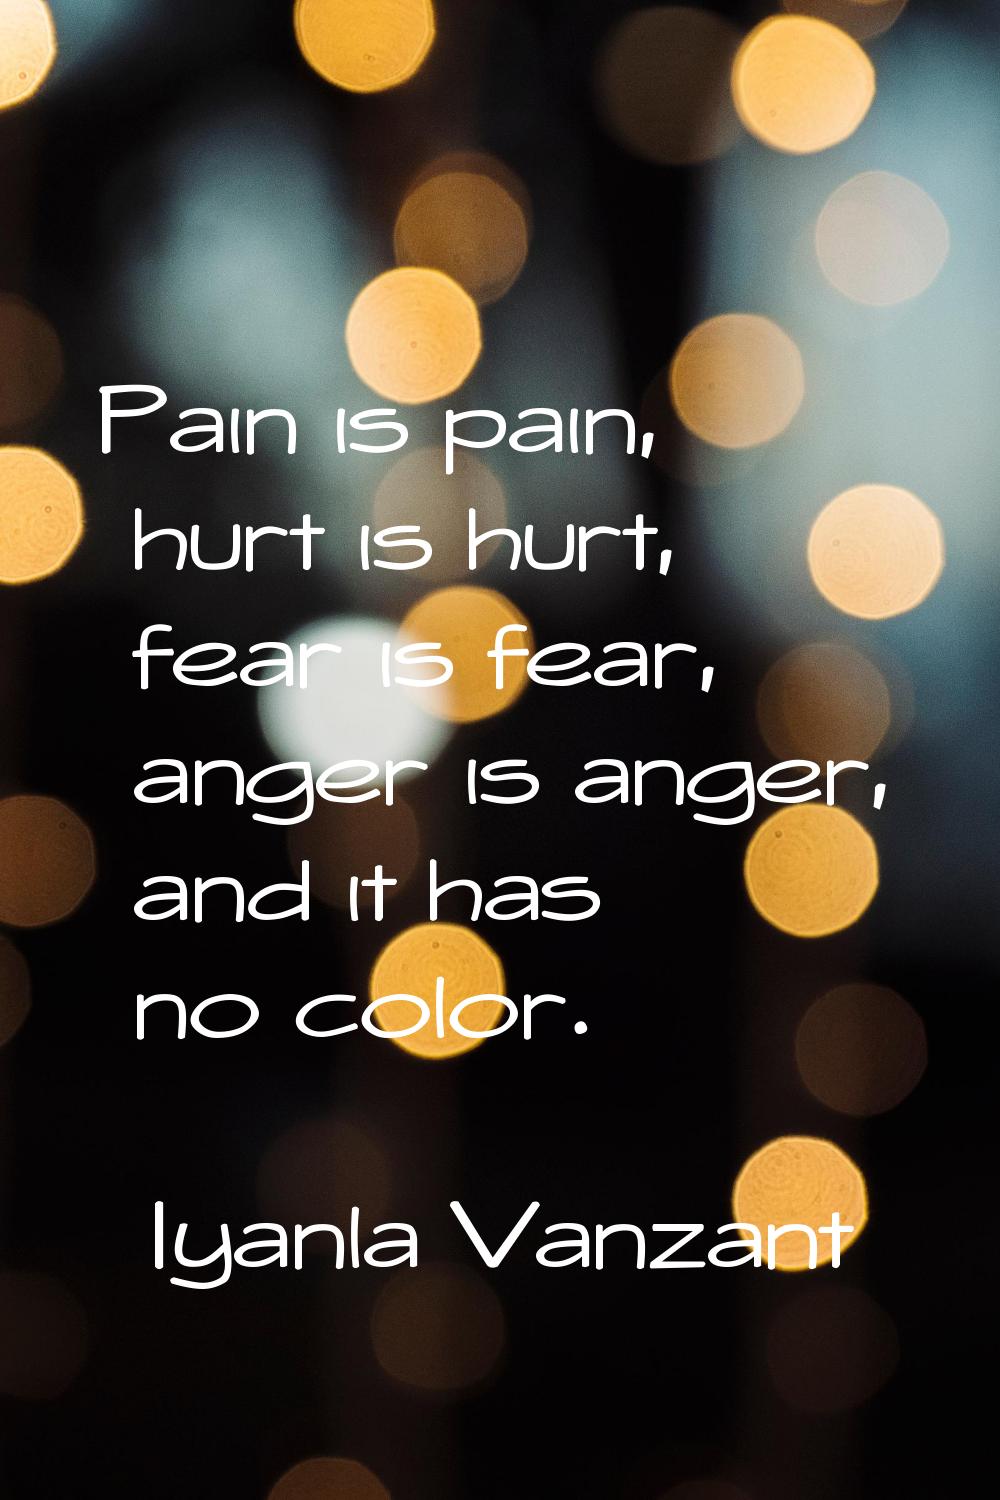 Pain is pain, hurt is hurt, fear is fear, anger is anger, and it has no color.